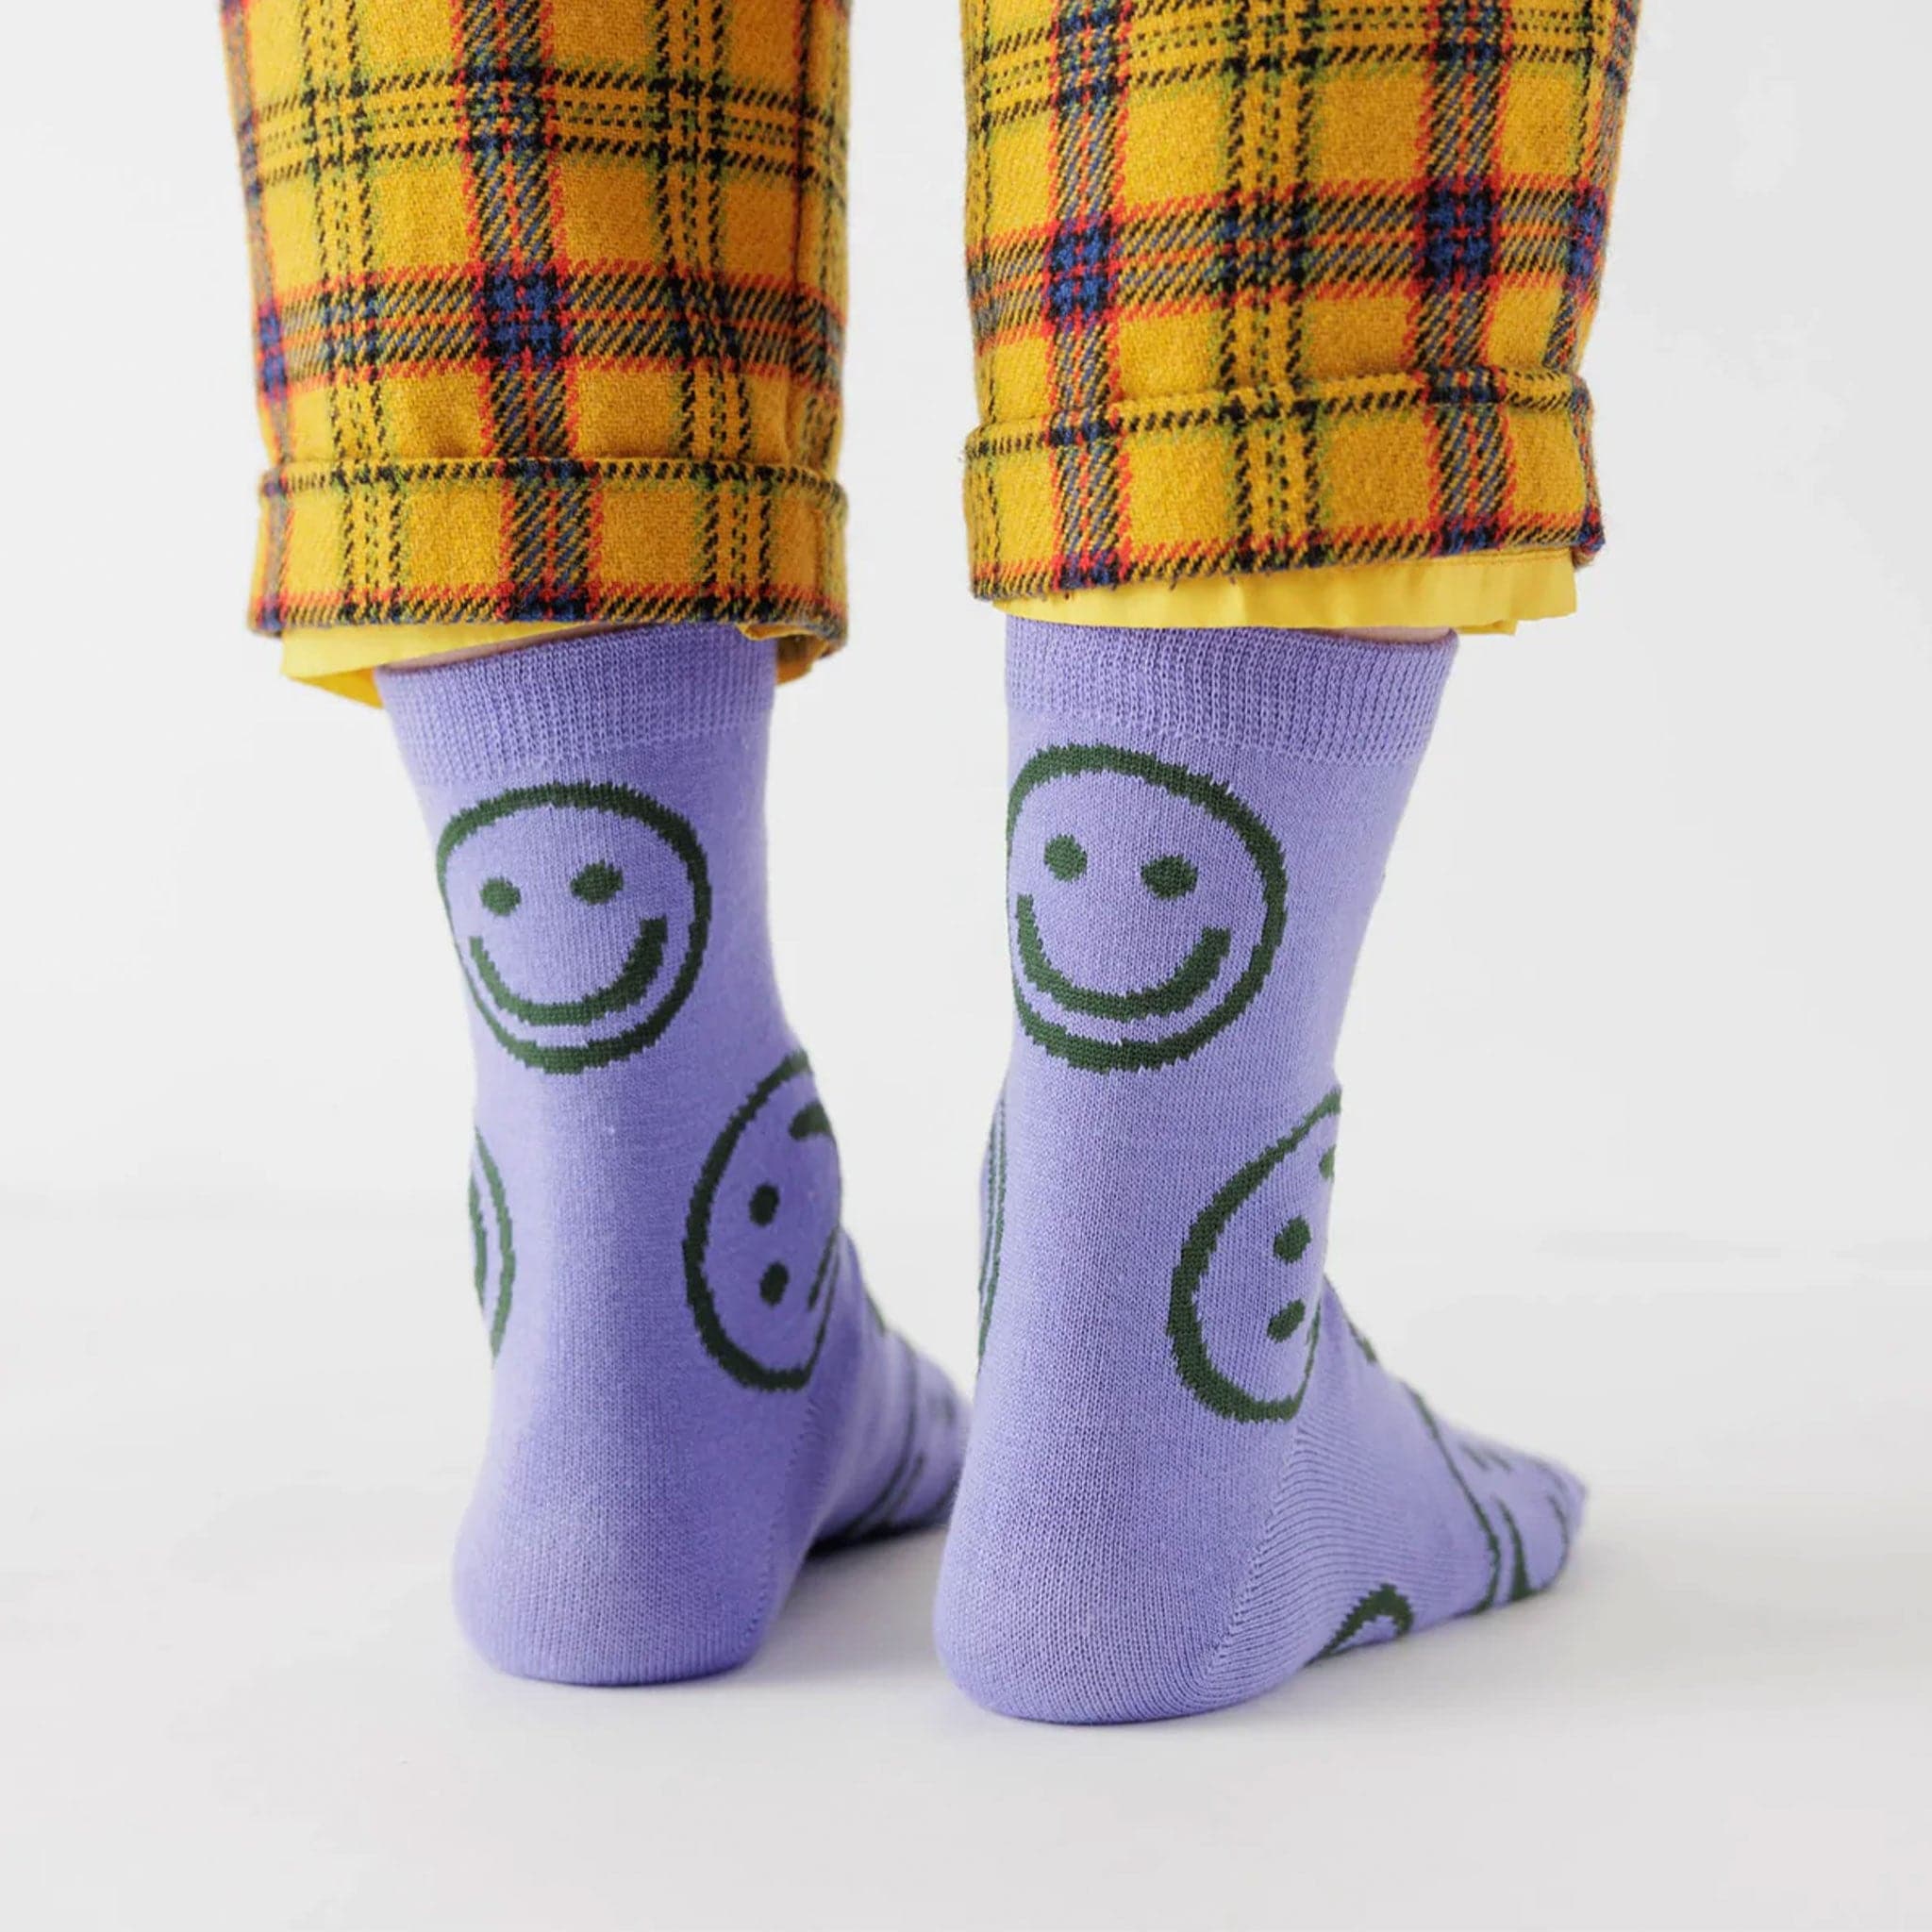 Purple mid calf socks with dark green smiley faces.